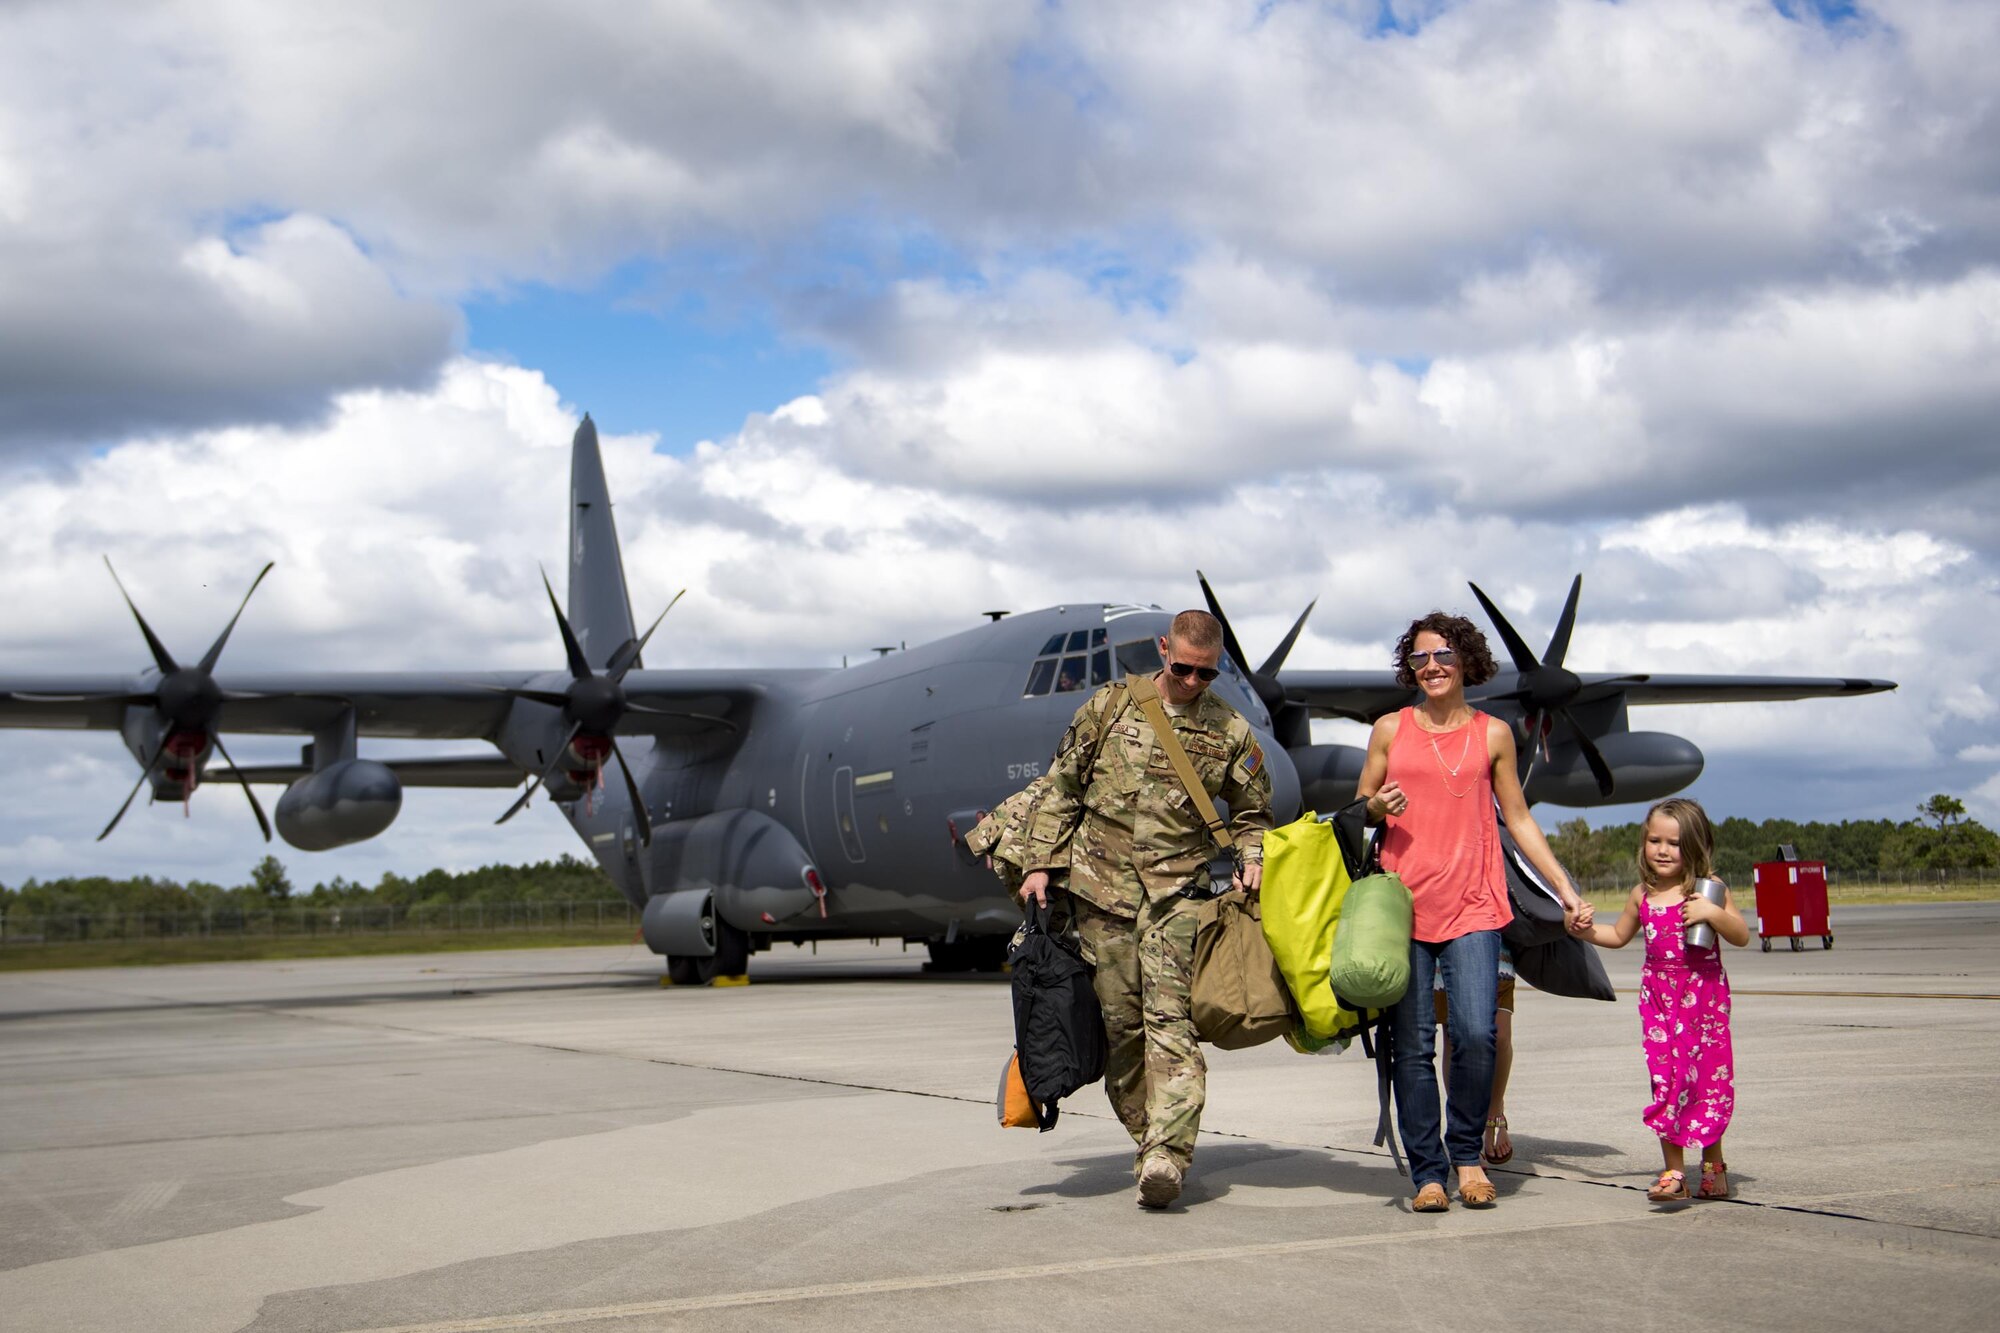 Tech. Sgt. Michael Guerra, 71st Rescue Squadron (RQS) loadmaster, departs an HC-130J Combat King II with his family during a redeployment, Oct. 6, 2017, at Moody Air Force Base, Ga. Airmen from the 71st RQS supported deployed operations by providing expeditionary personnel with on-call recovery forces should they need rescued. (U.S. Air Force photo by Airman 1st Class Daniel Snider)